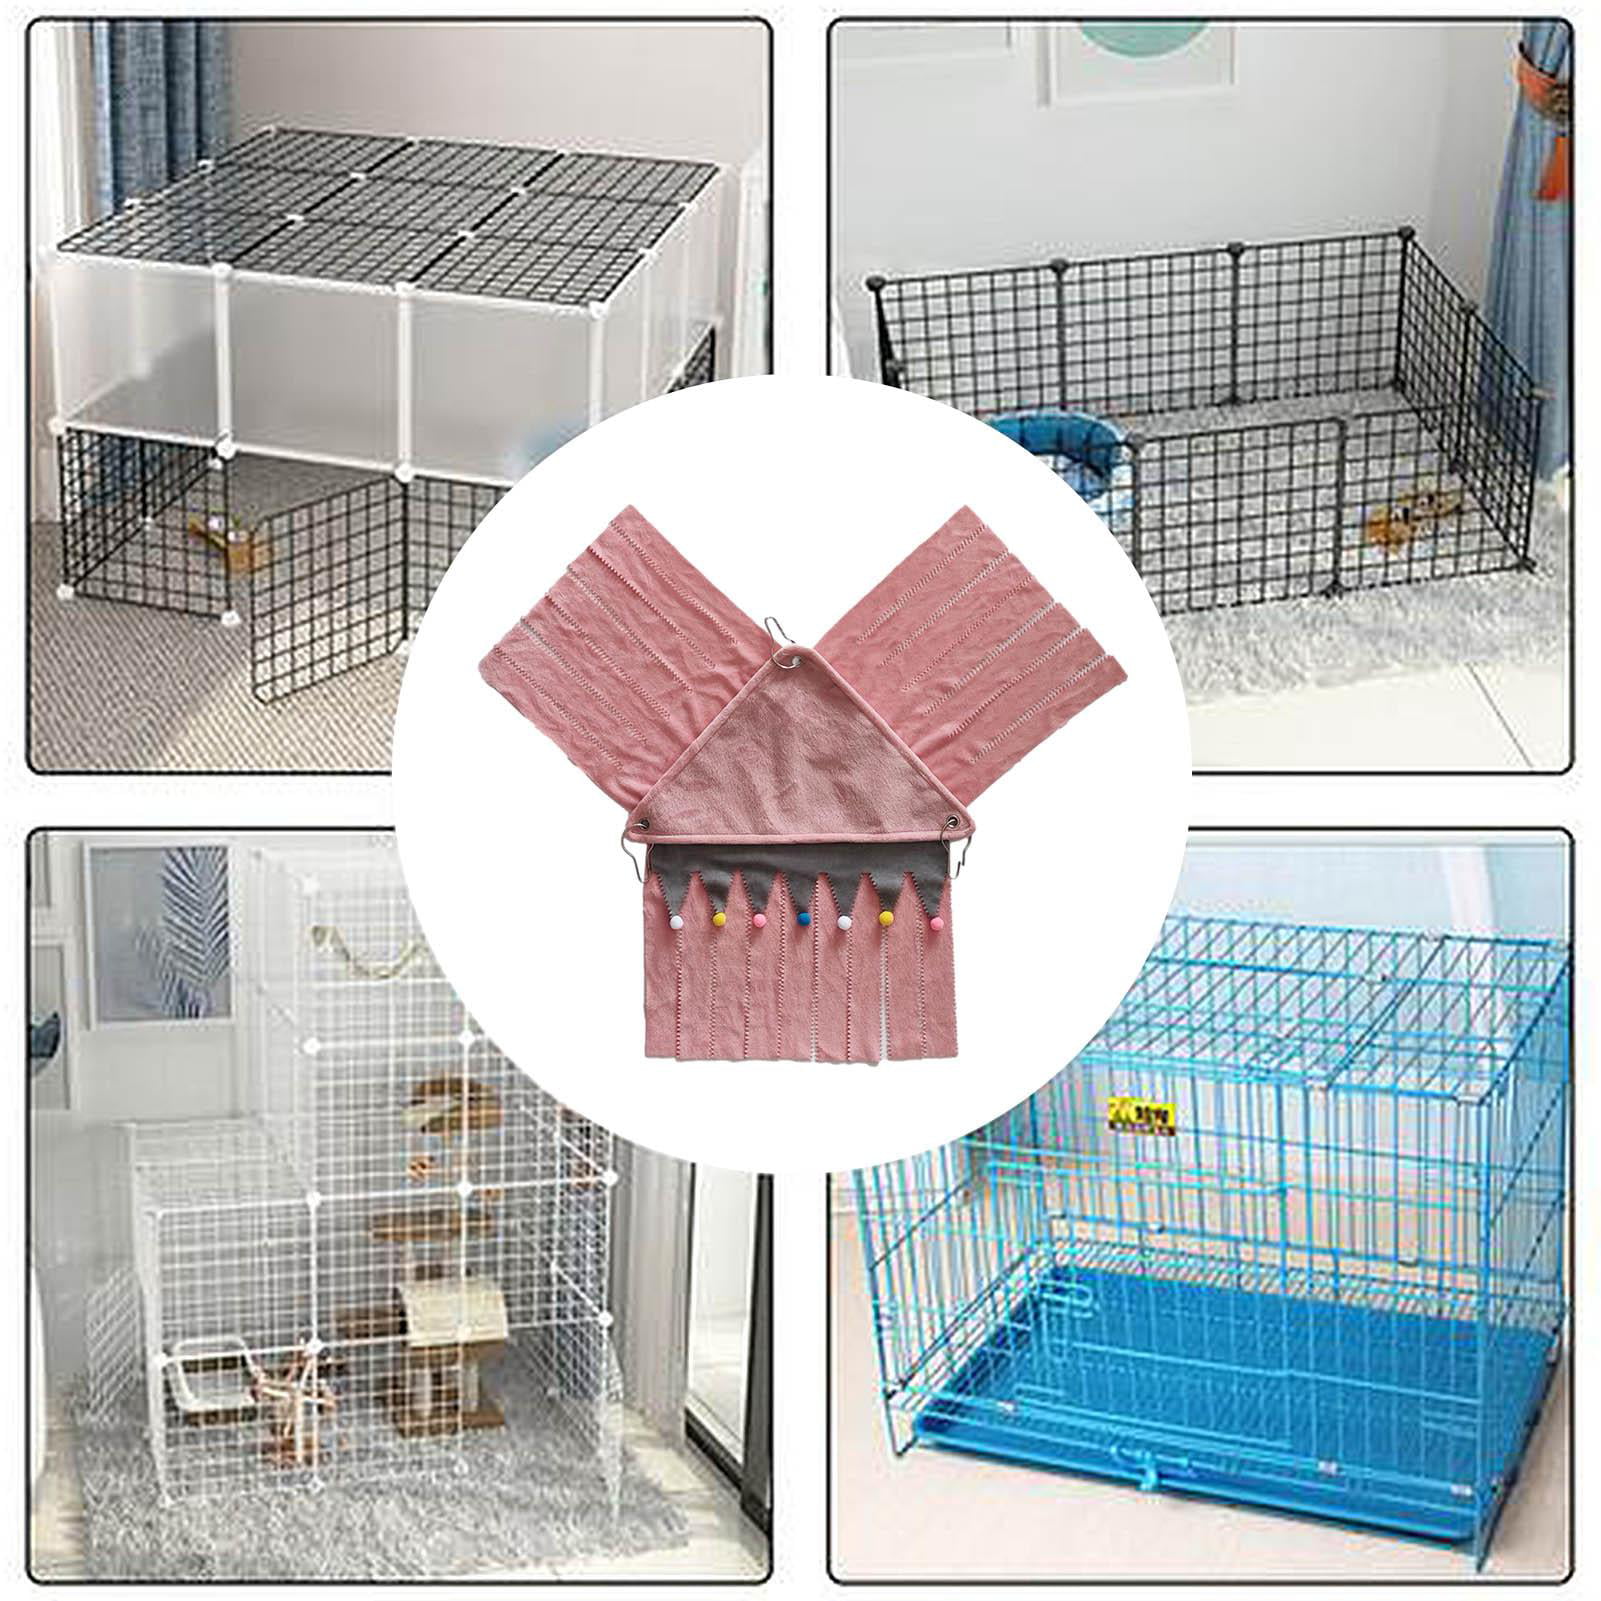 Bunny & Other Small Animals Rats Corner Fleece Forest Hideaway with Removable Pad for Guinea Pigs Ferrets Tunnel House Chinchillas PStarDMoon Guinea Pig Hideout Pink1 